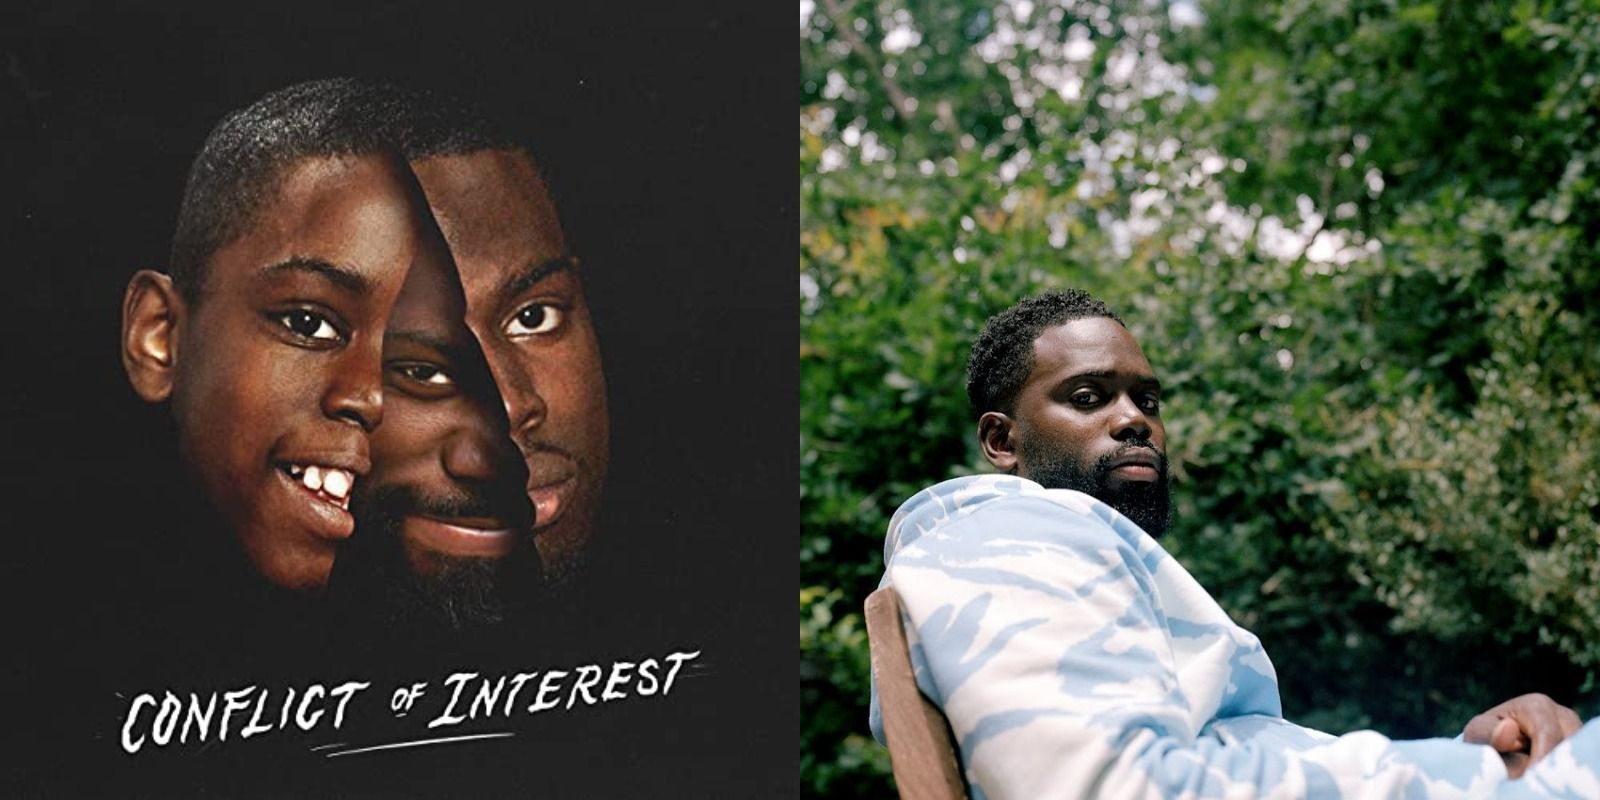 Split image of the album cover of Conflict of Interest and Ghetts